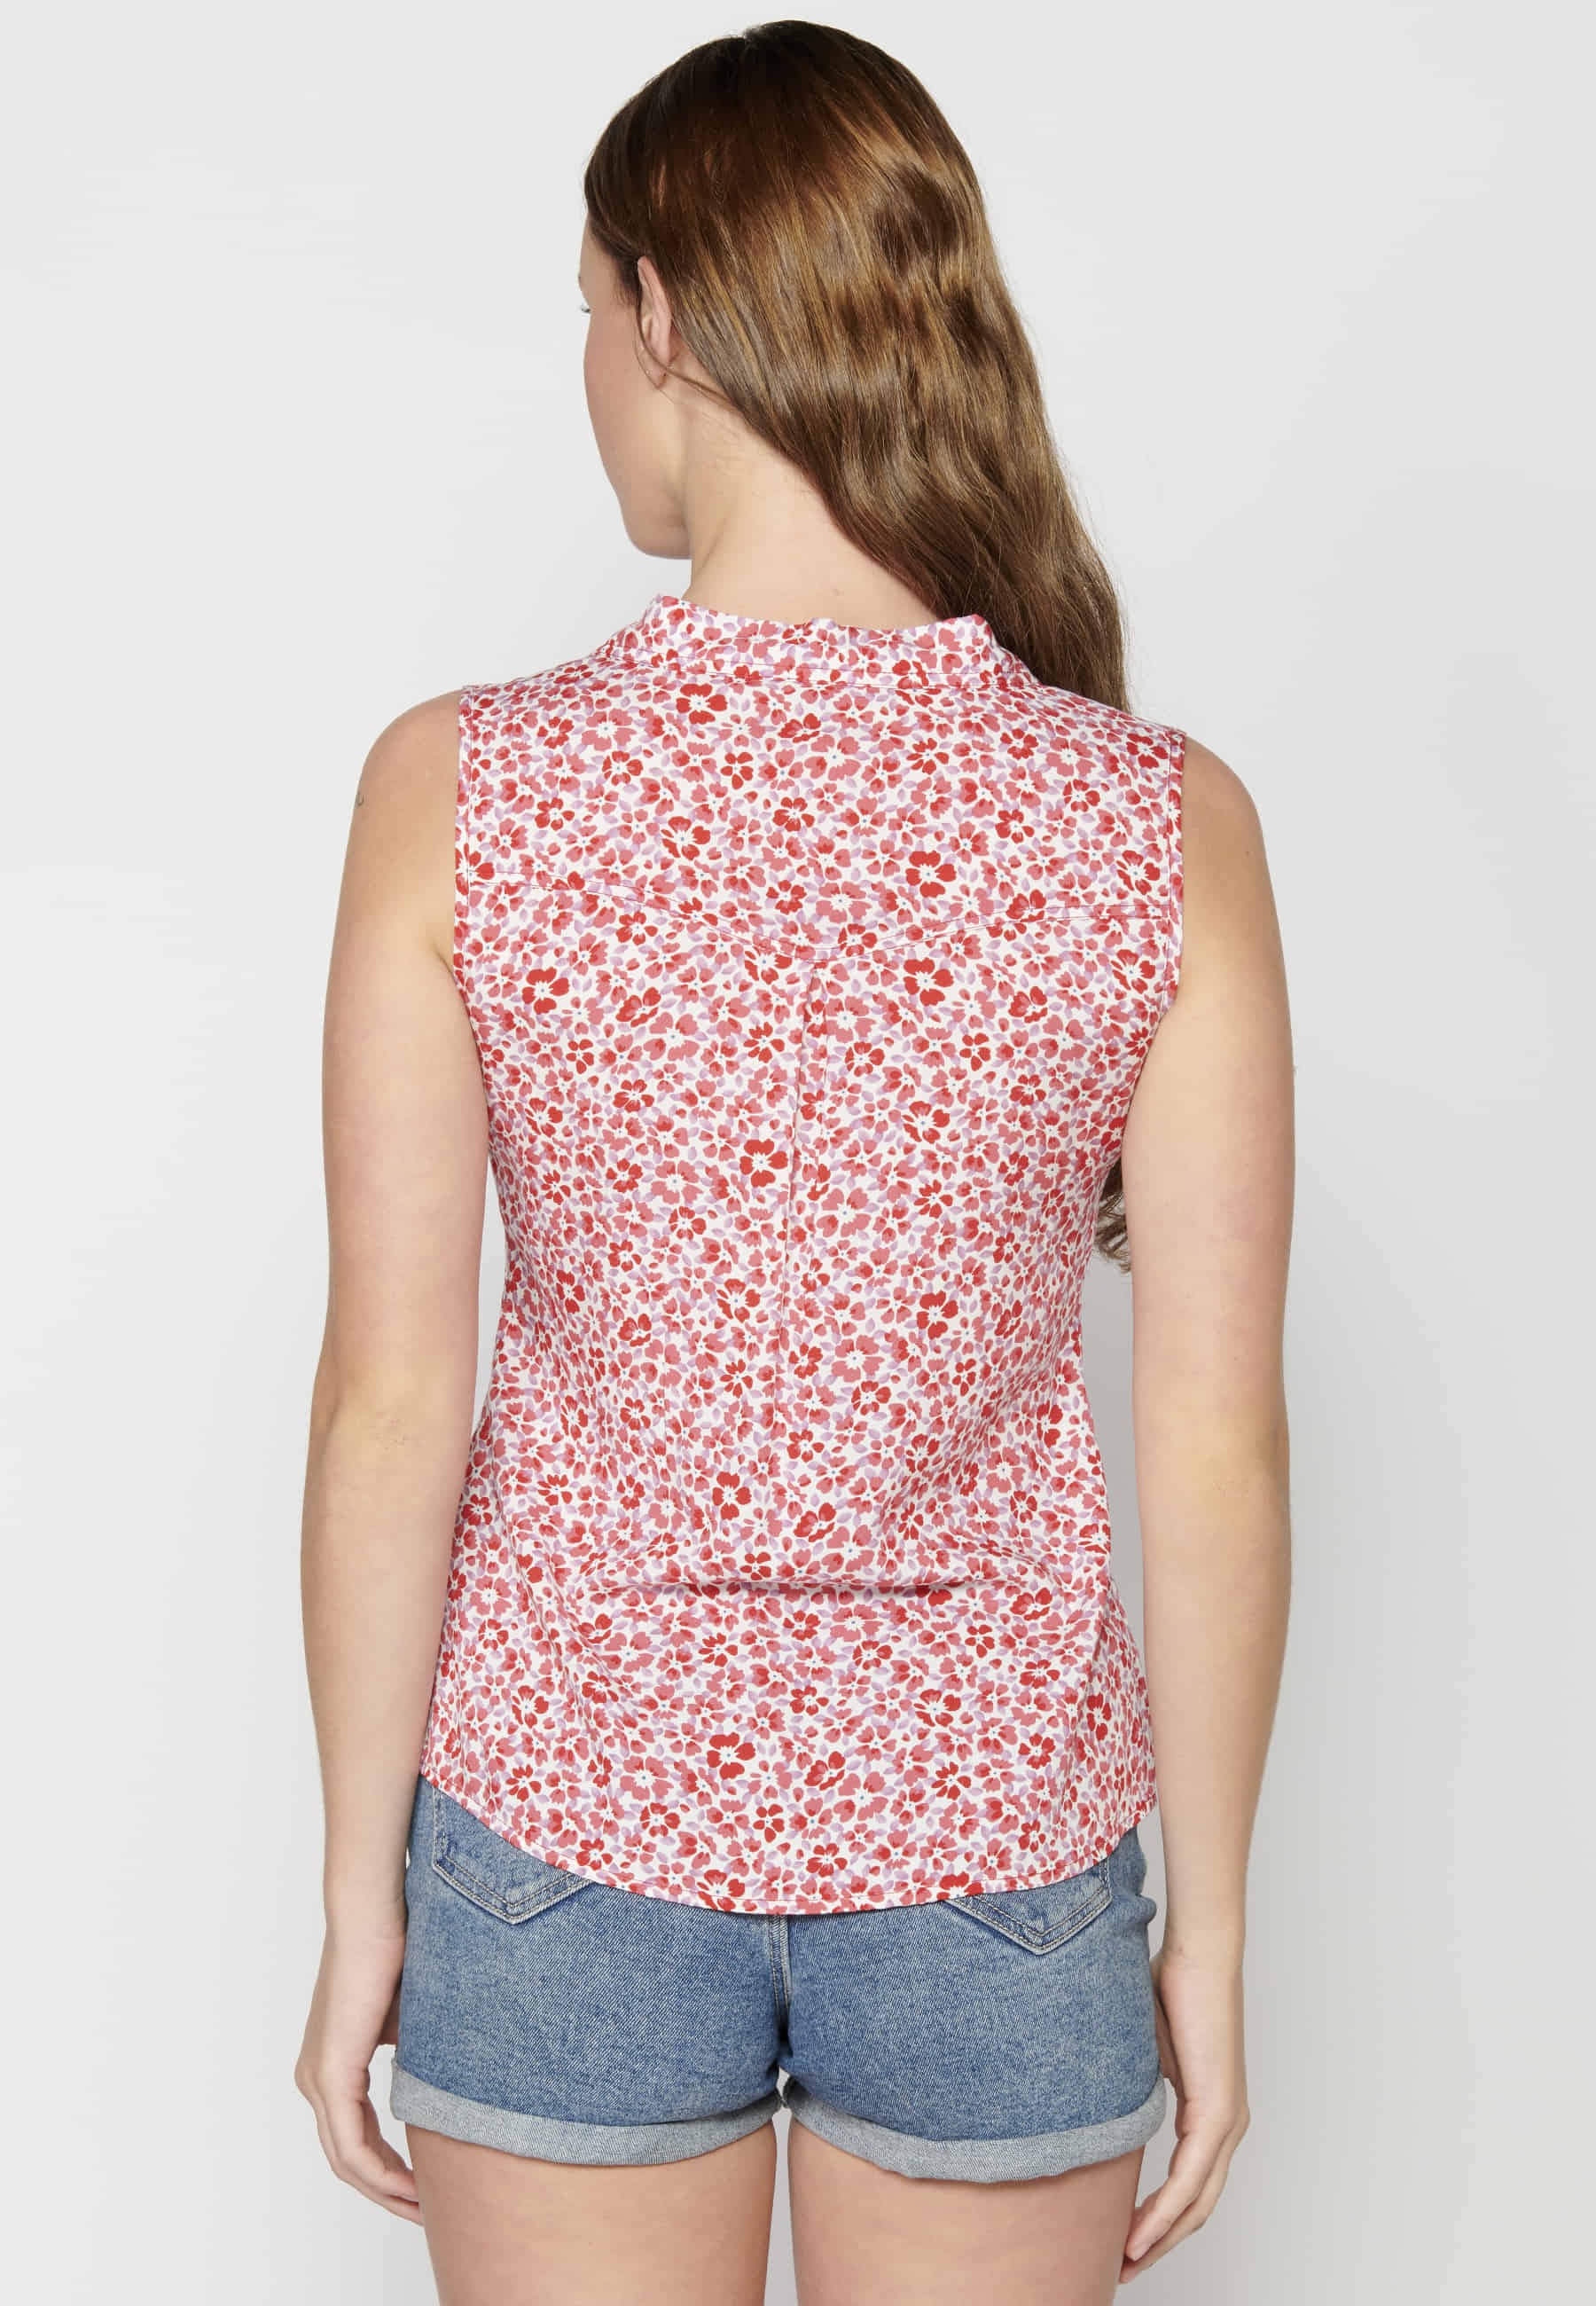 Red Floral Print Sleeveless Blouse for Women